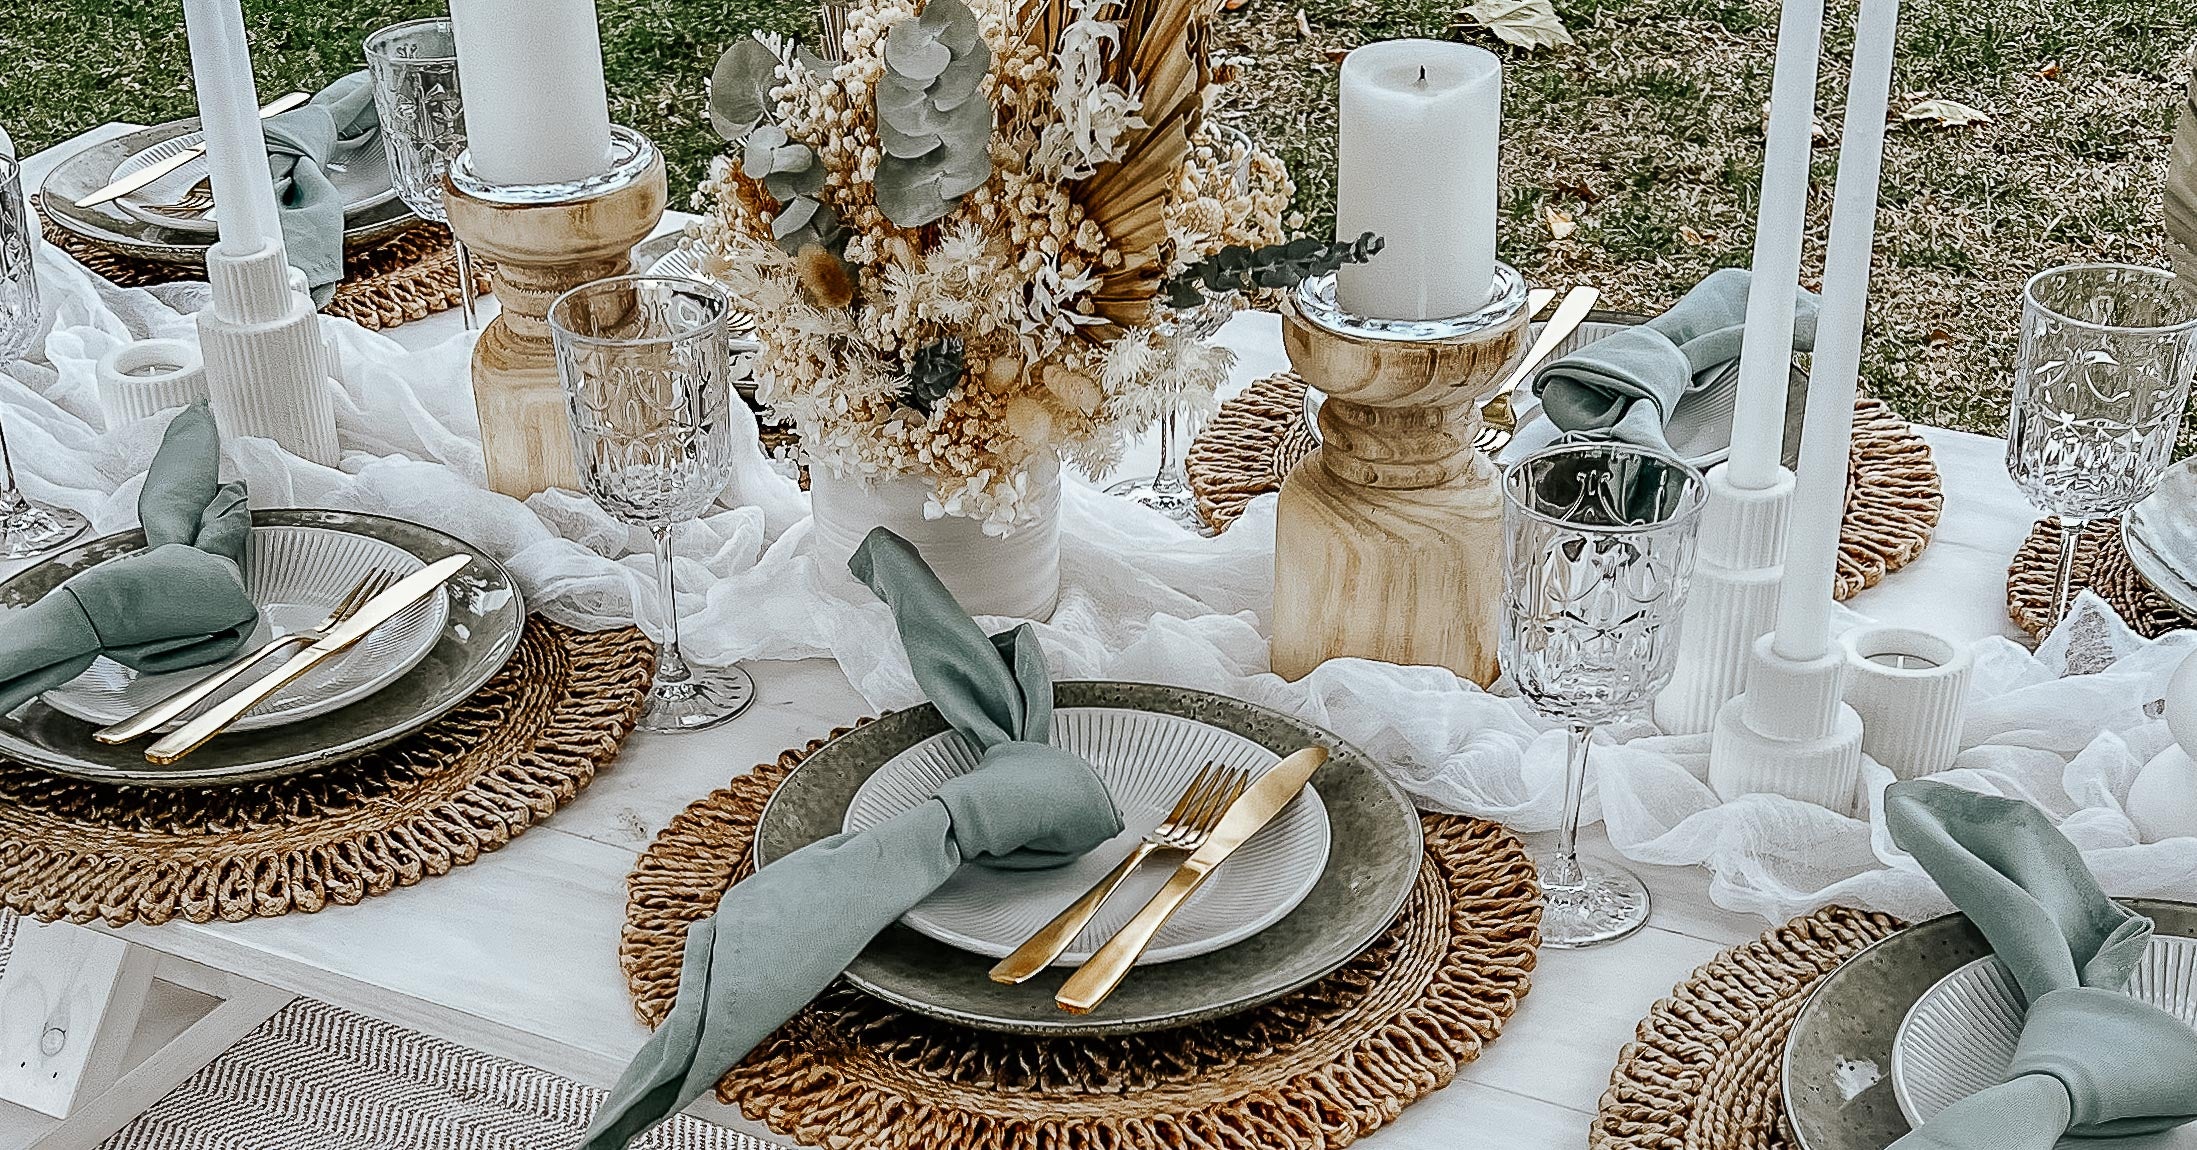 Sage green picnic set up in a park with dried flowers and natural candle holders